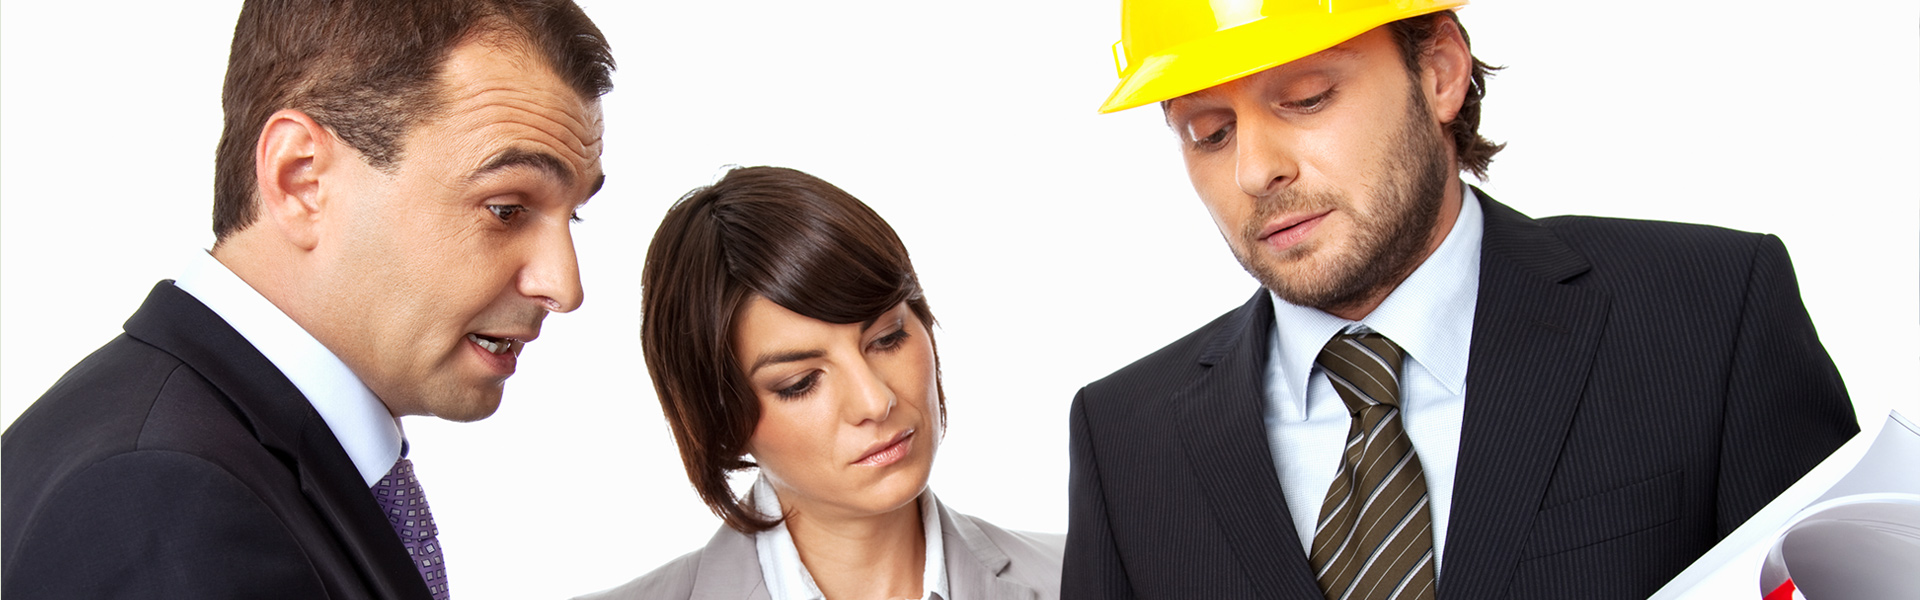 Construction Lawyer Perth